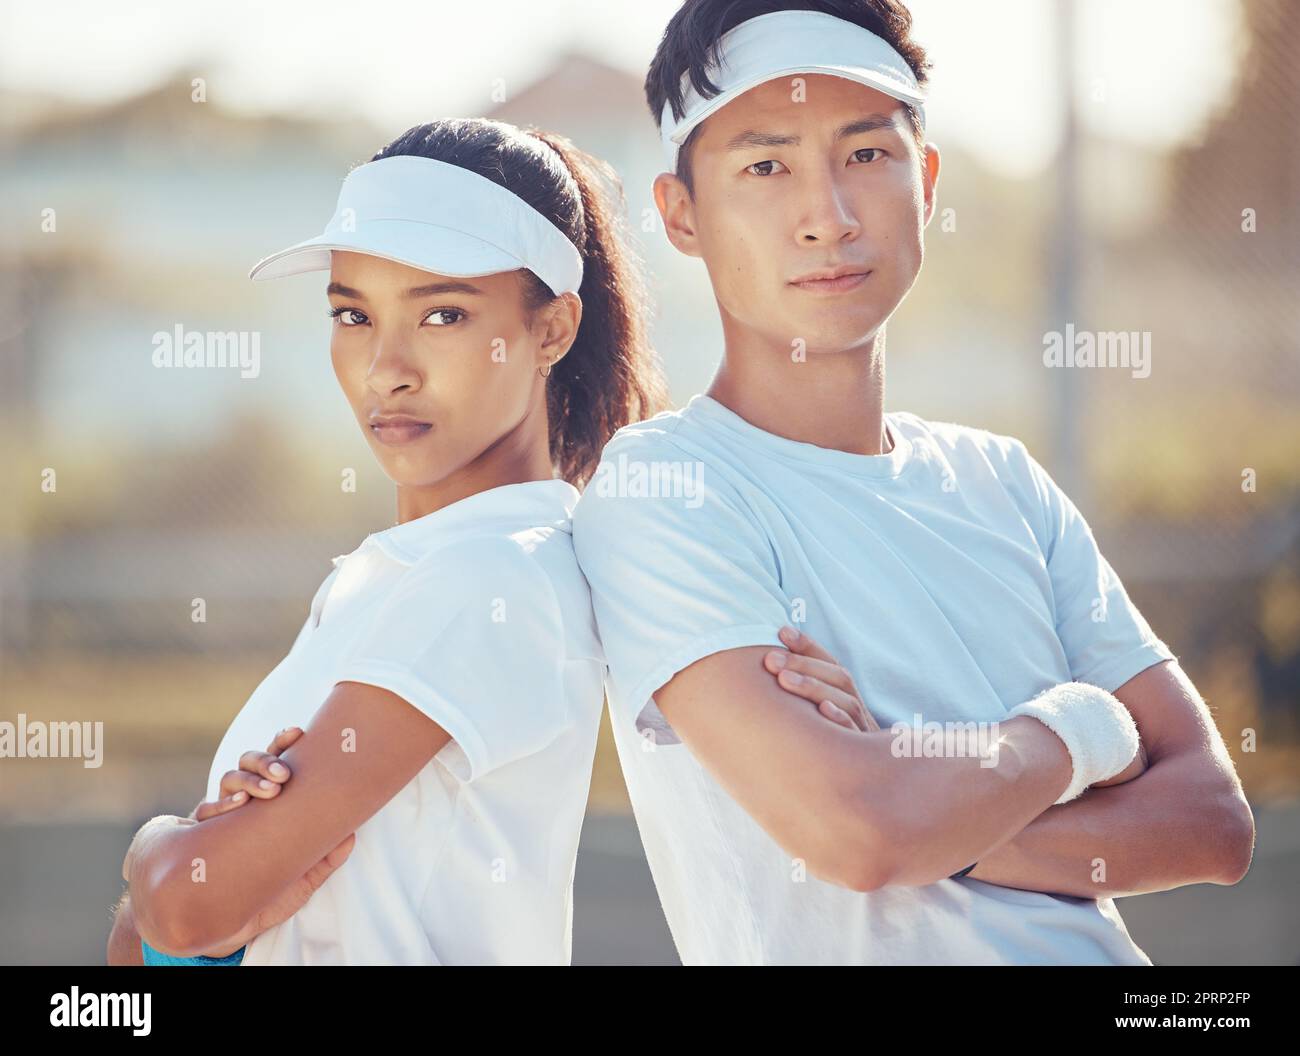 Tennis team, competitive sport and serious man and woman ready for a game or match on an outdoor court. Fitness with players standing together for collaboration during competition or tournament Stock Photo